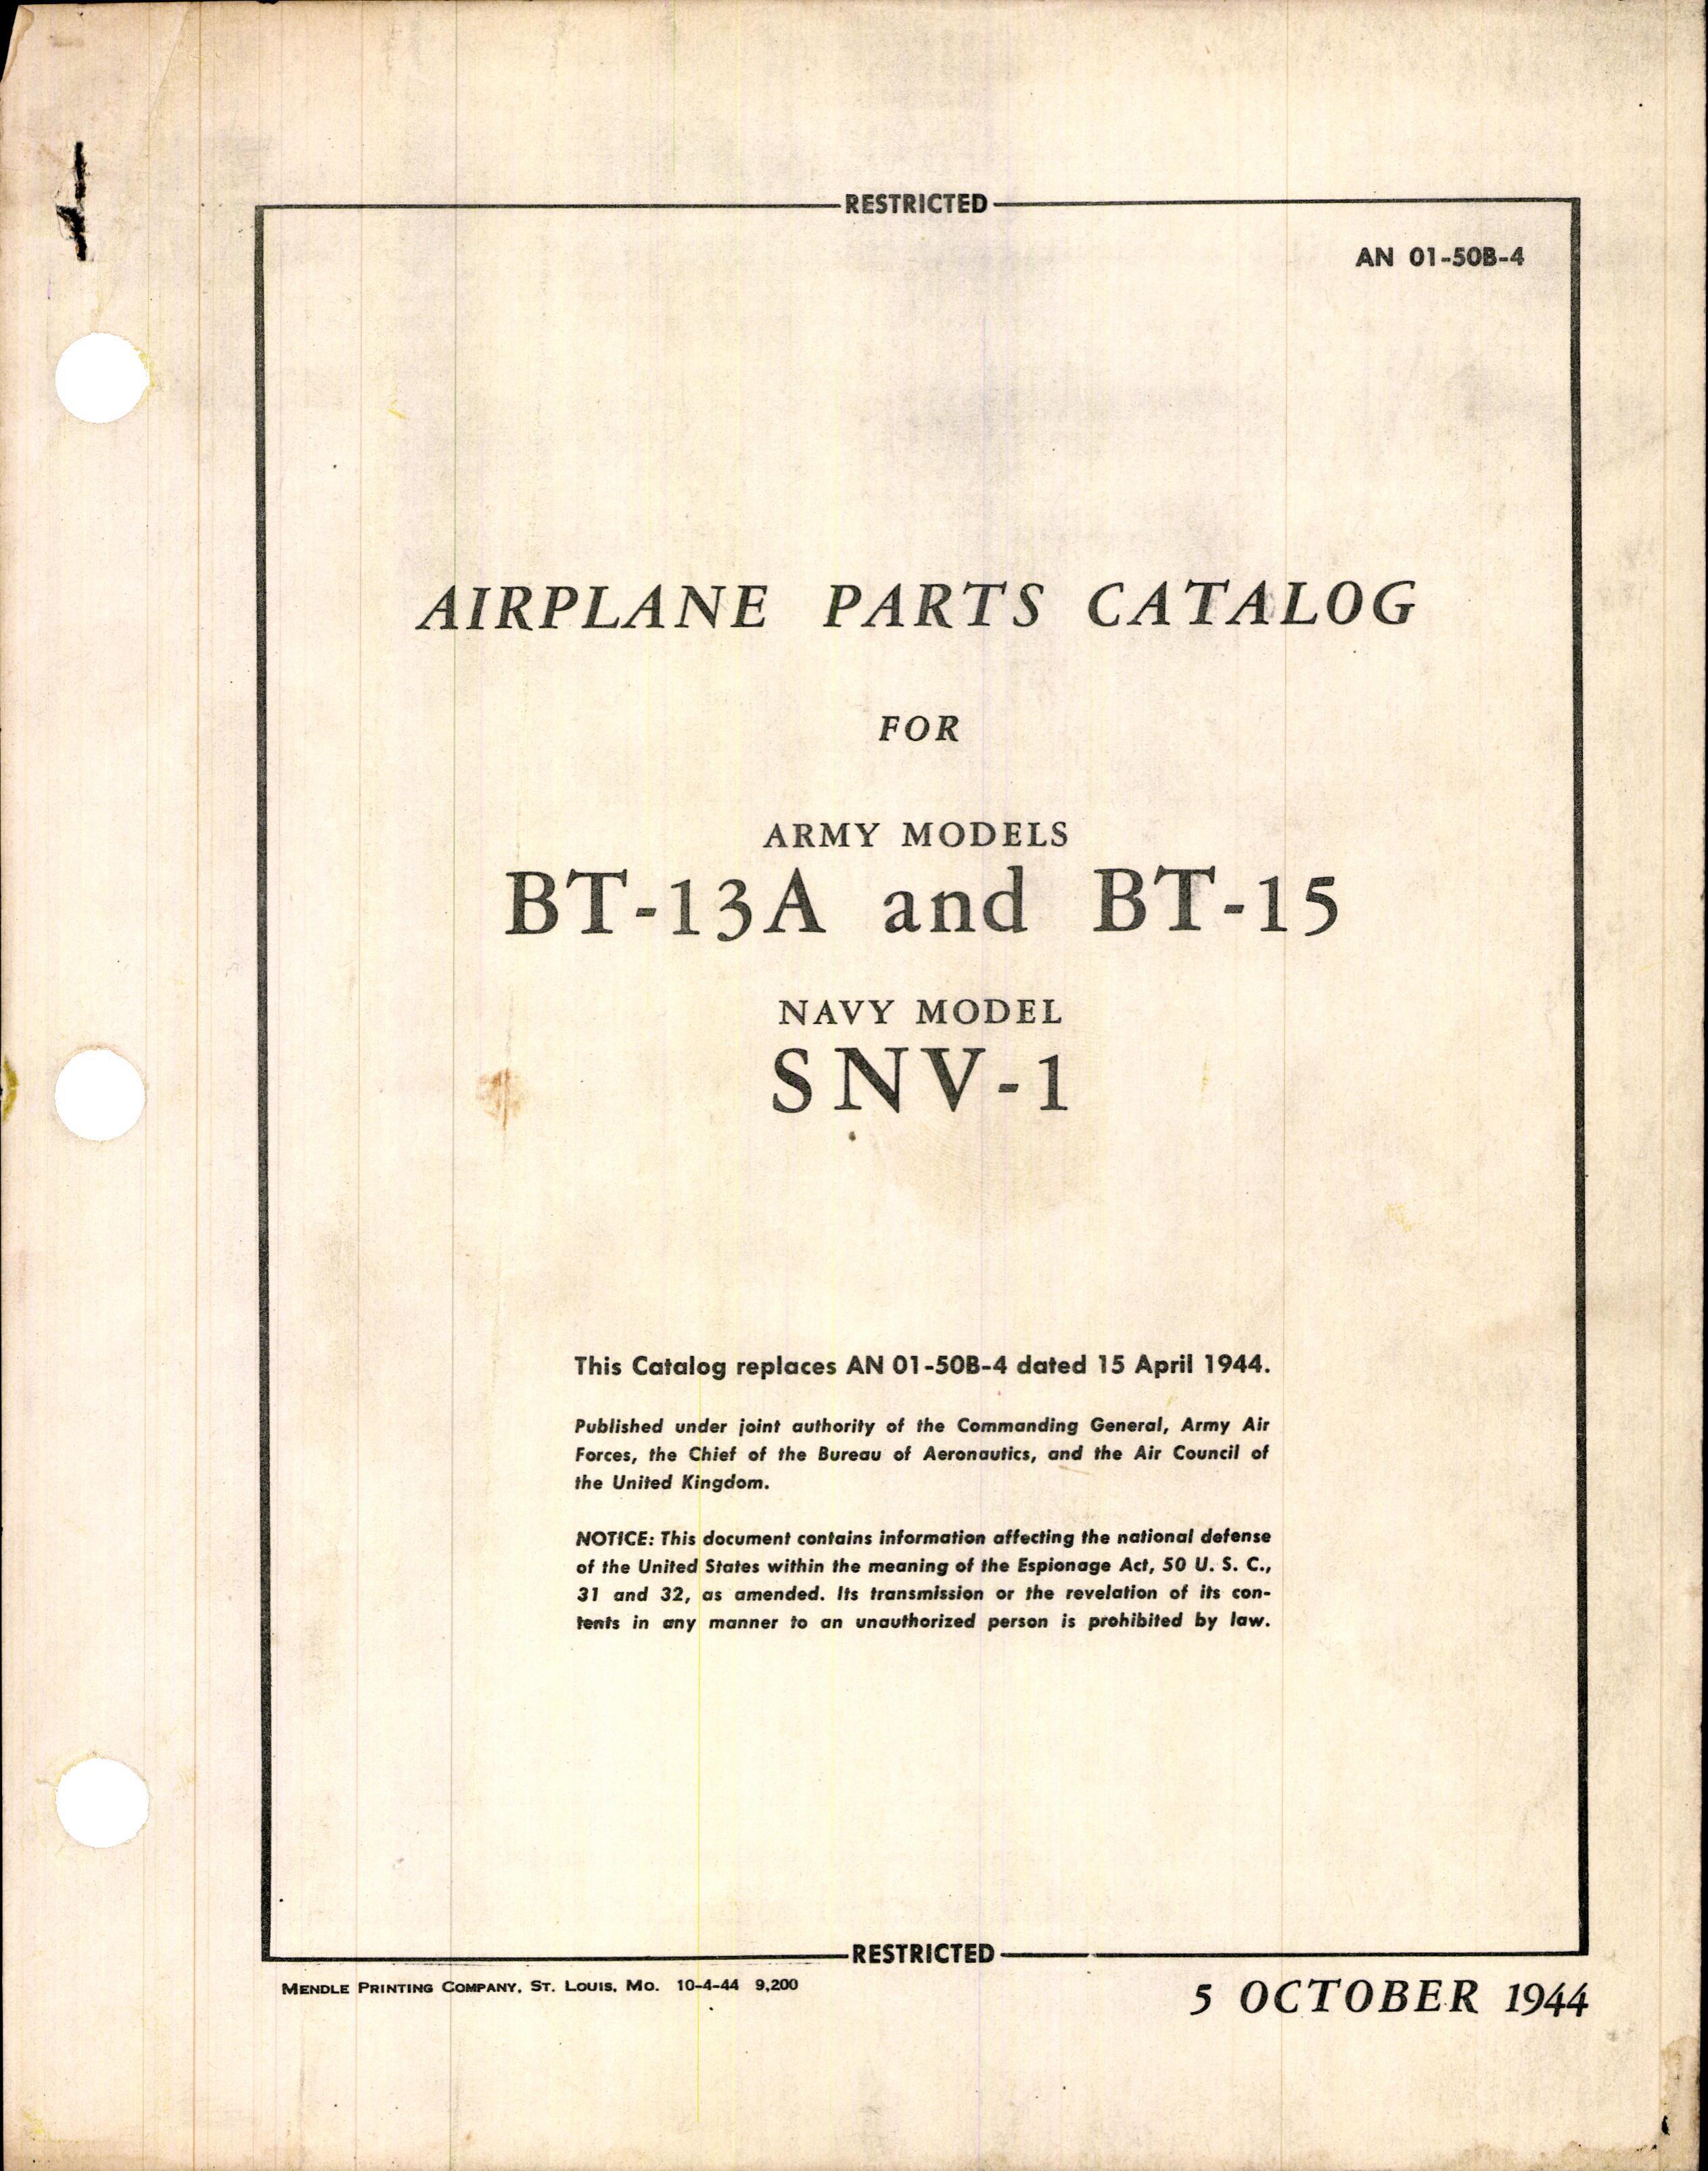 Sample page 1 from AirCorps Library document: Airplane Parts Catalog for BT-13A, BT-15, and SNV-1